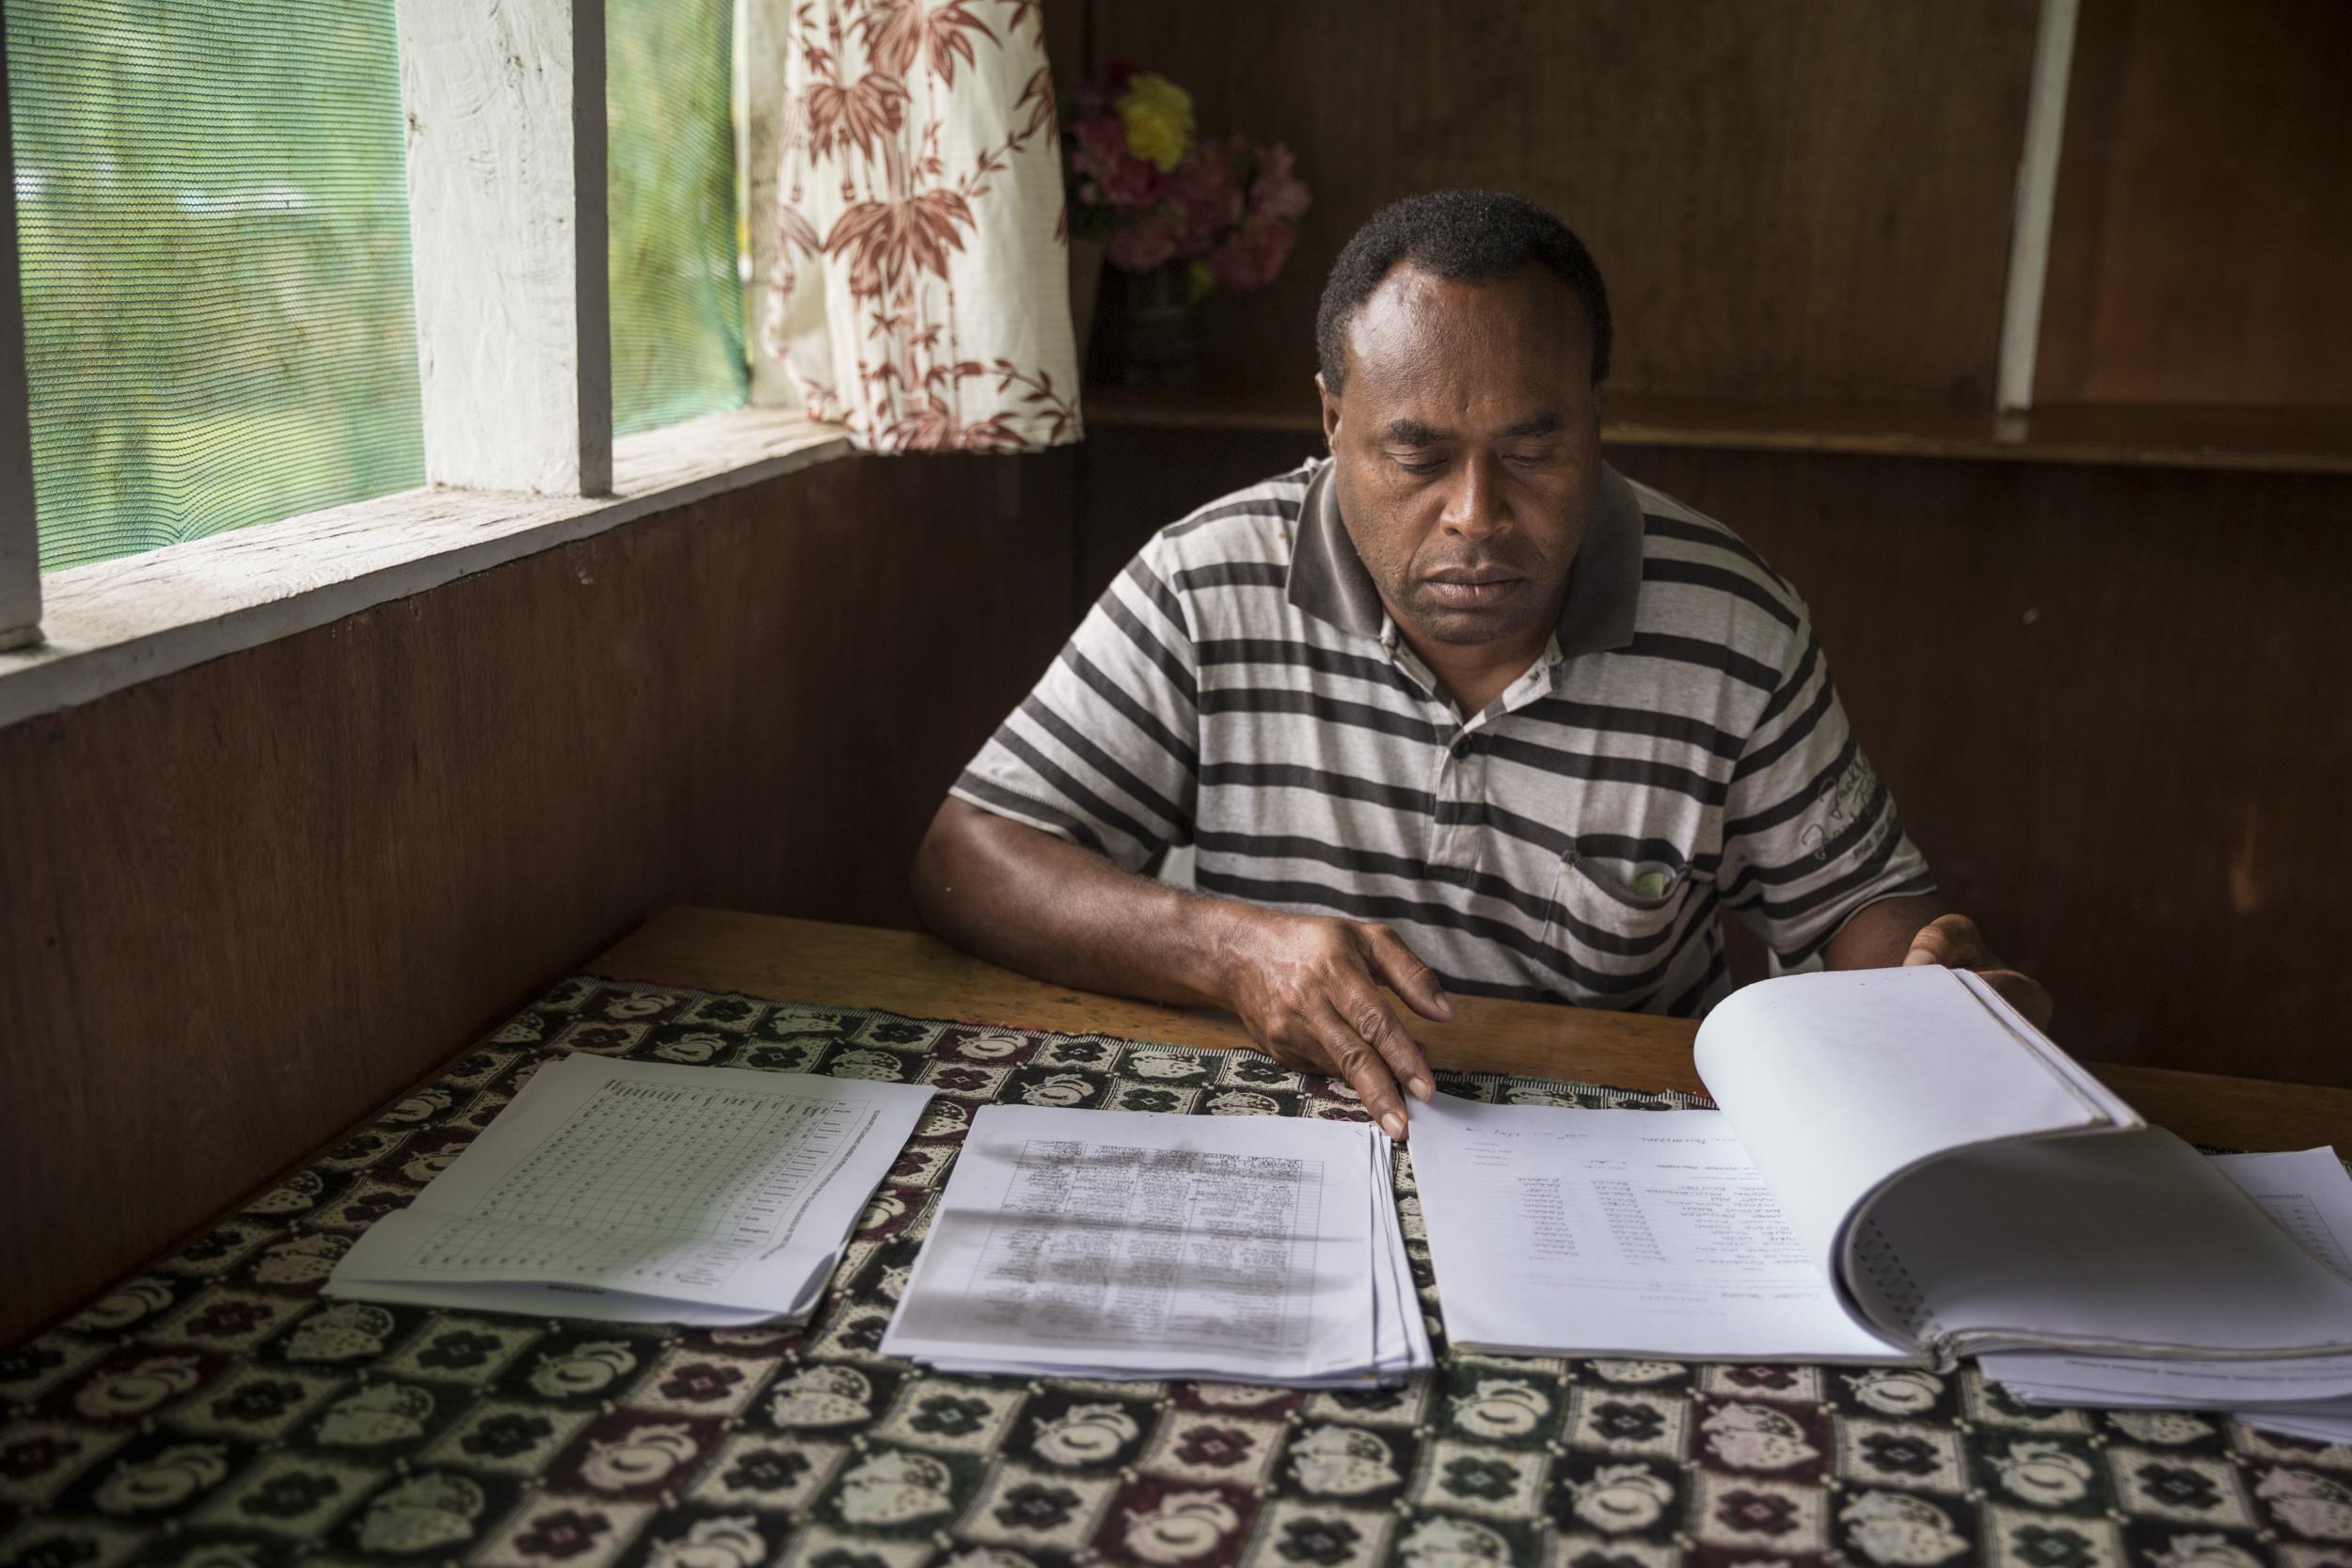 William Koiatuna, a community leader in the Pomio area, looks at petitions signed by local communities against proposed logging and oil palm plantation operations (Fabio Erdos/Panos)